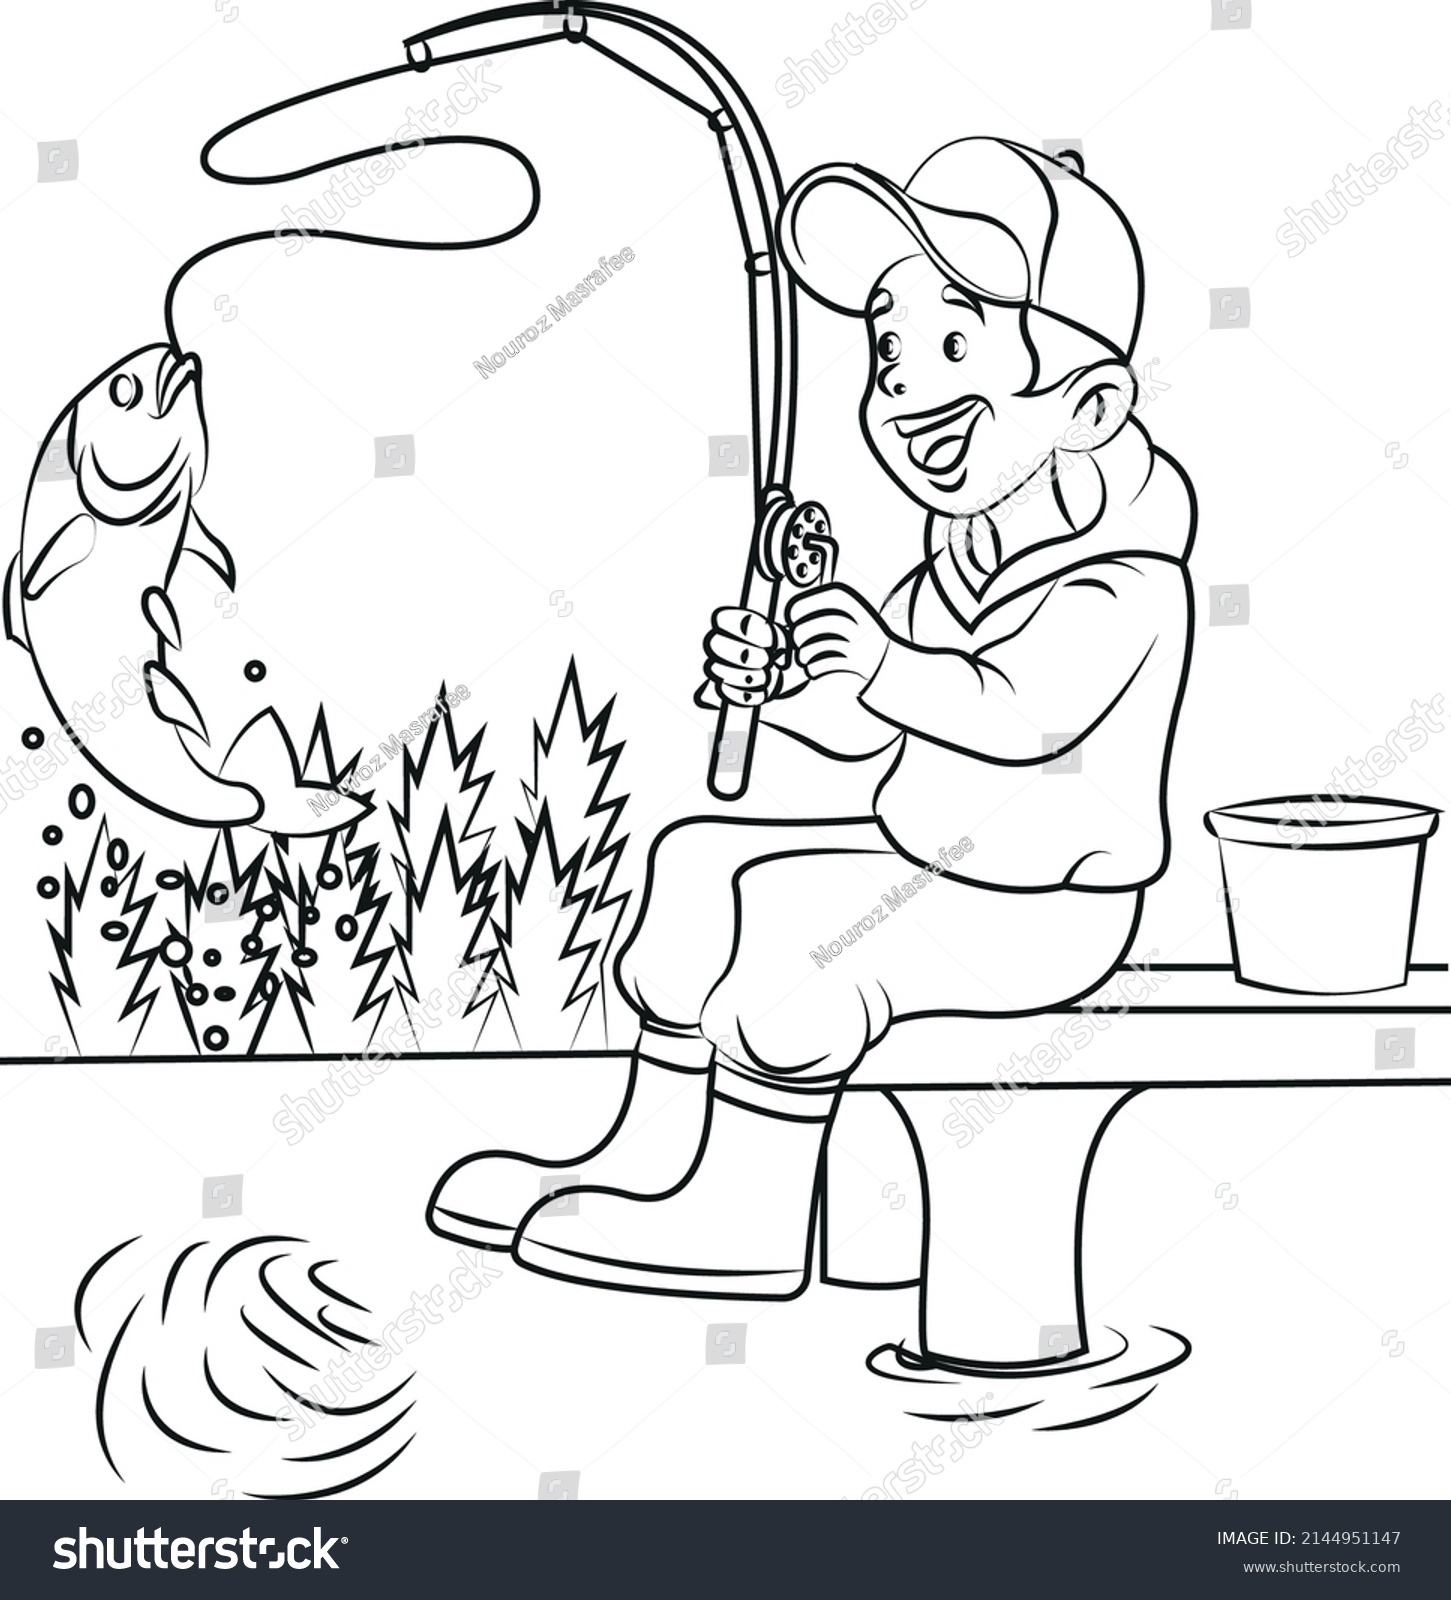 Kids fishing colouring book photos images and pictures